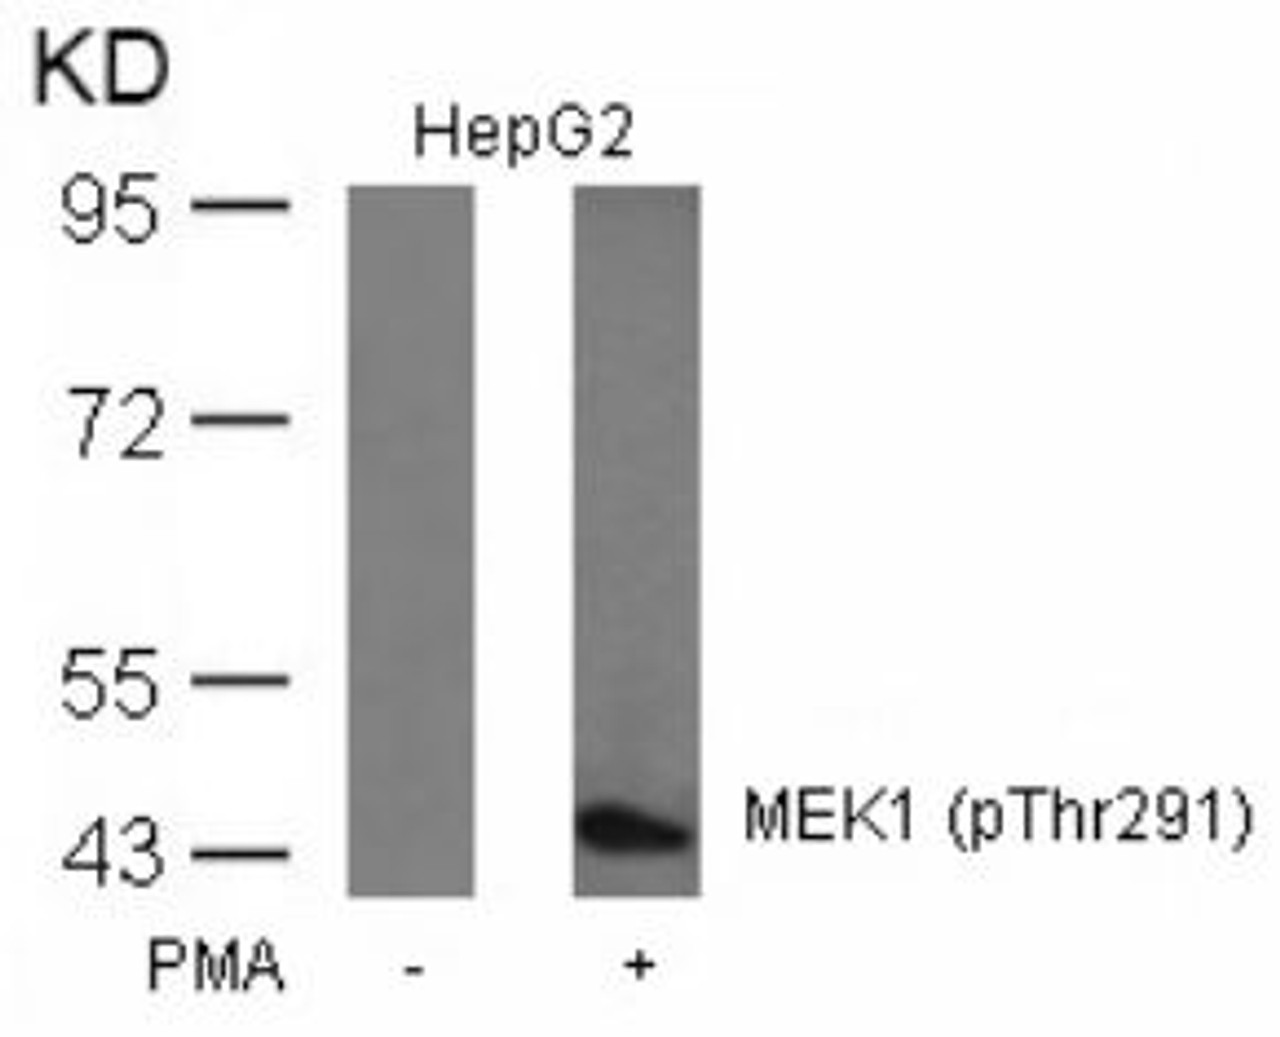 Western blot analysis of lysed extracts from HepG2 cells untreated or treated with PMA using MEK1 (Phospho-Thr291) .